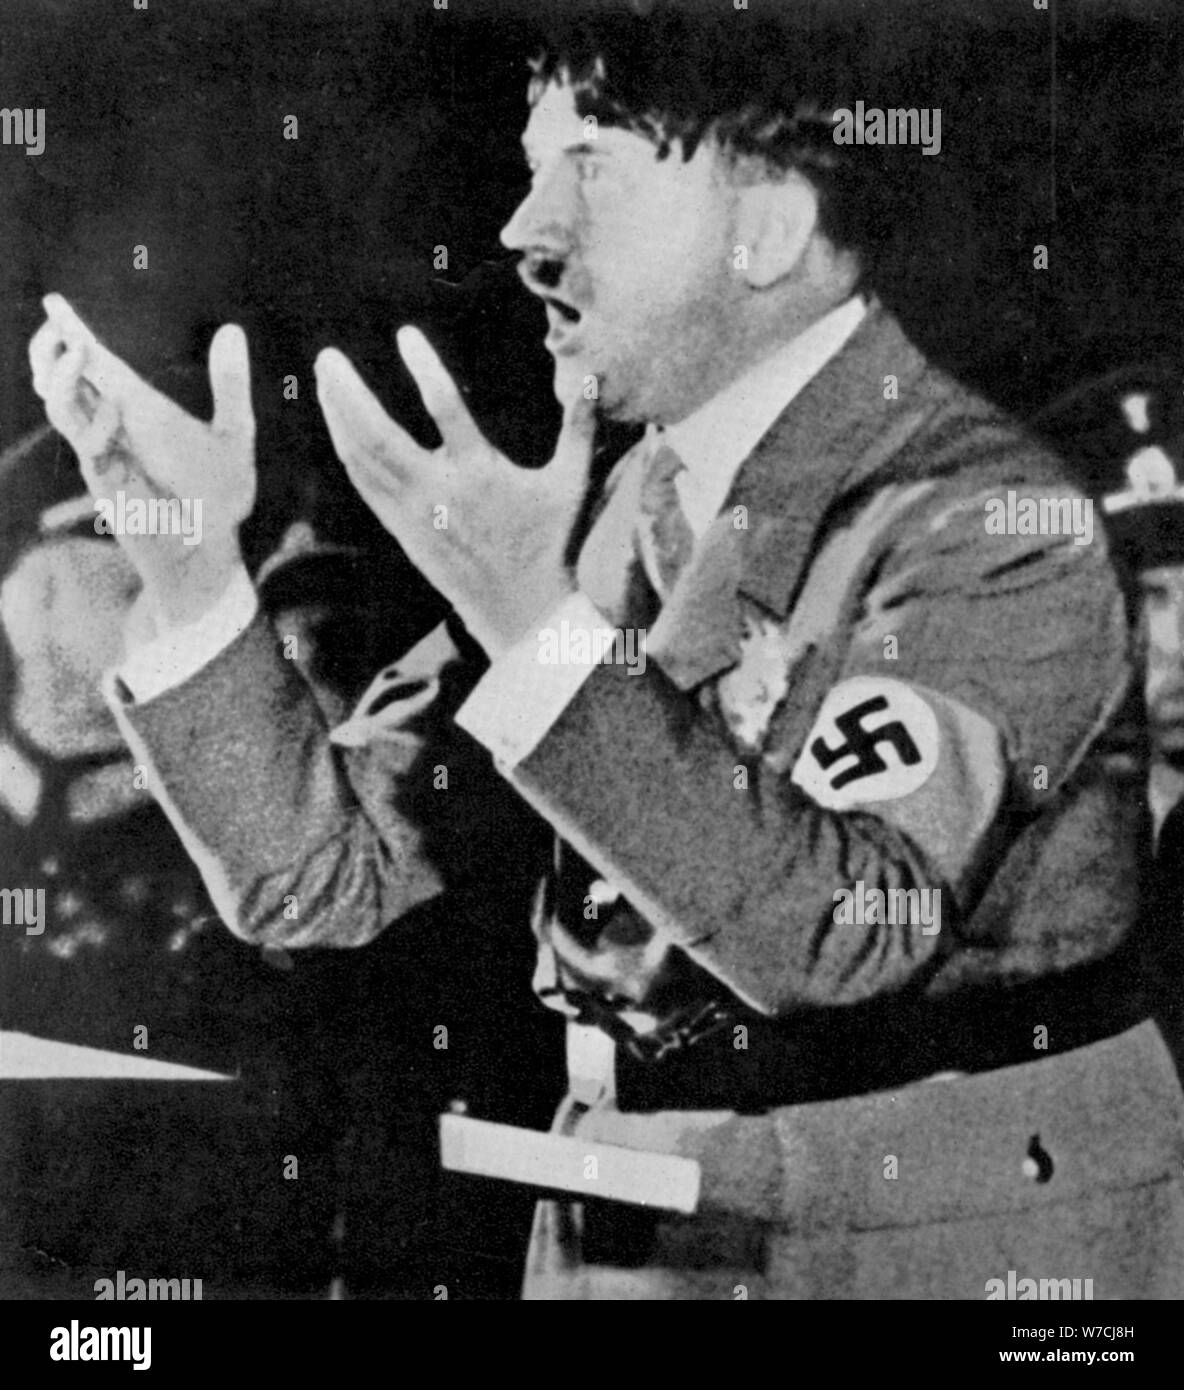 Adolph Hitler addressing a rally, c1930s. Artist: Unknown Stock Photo